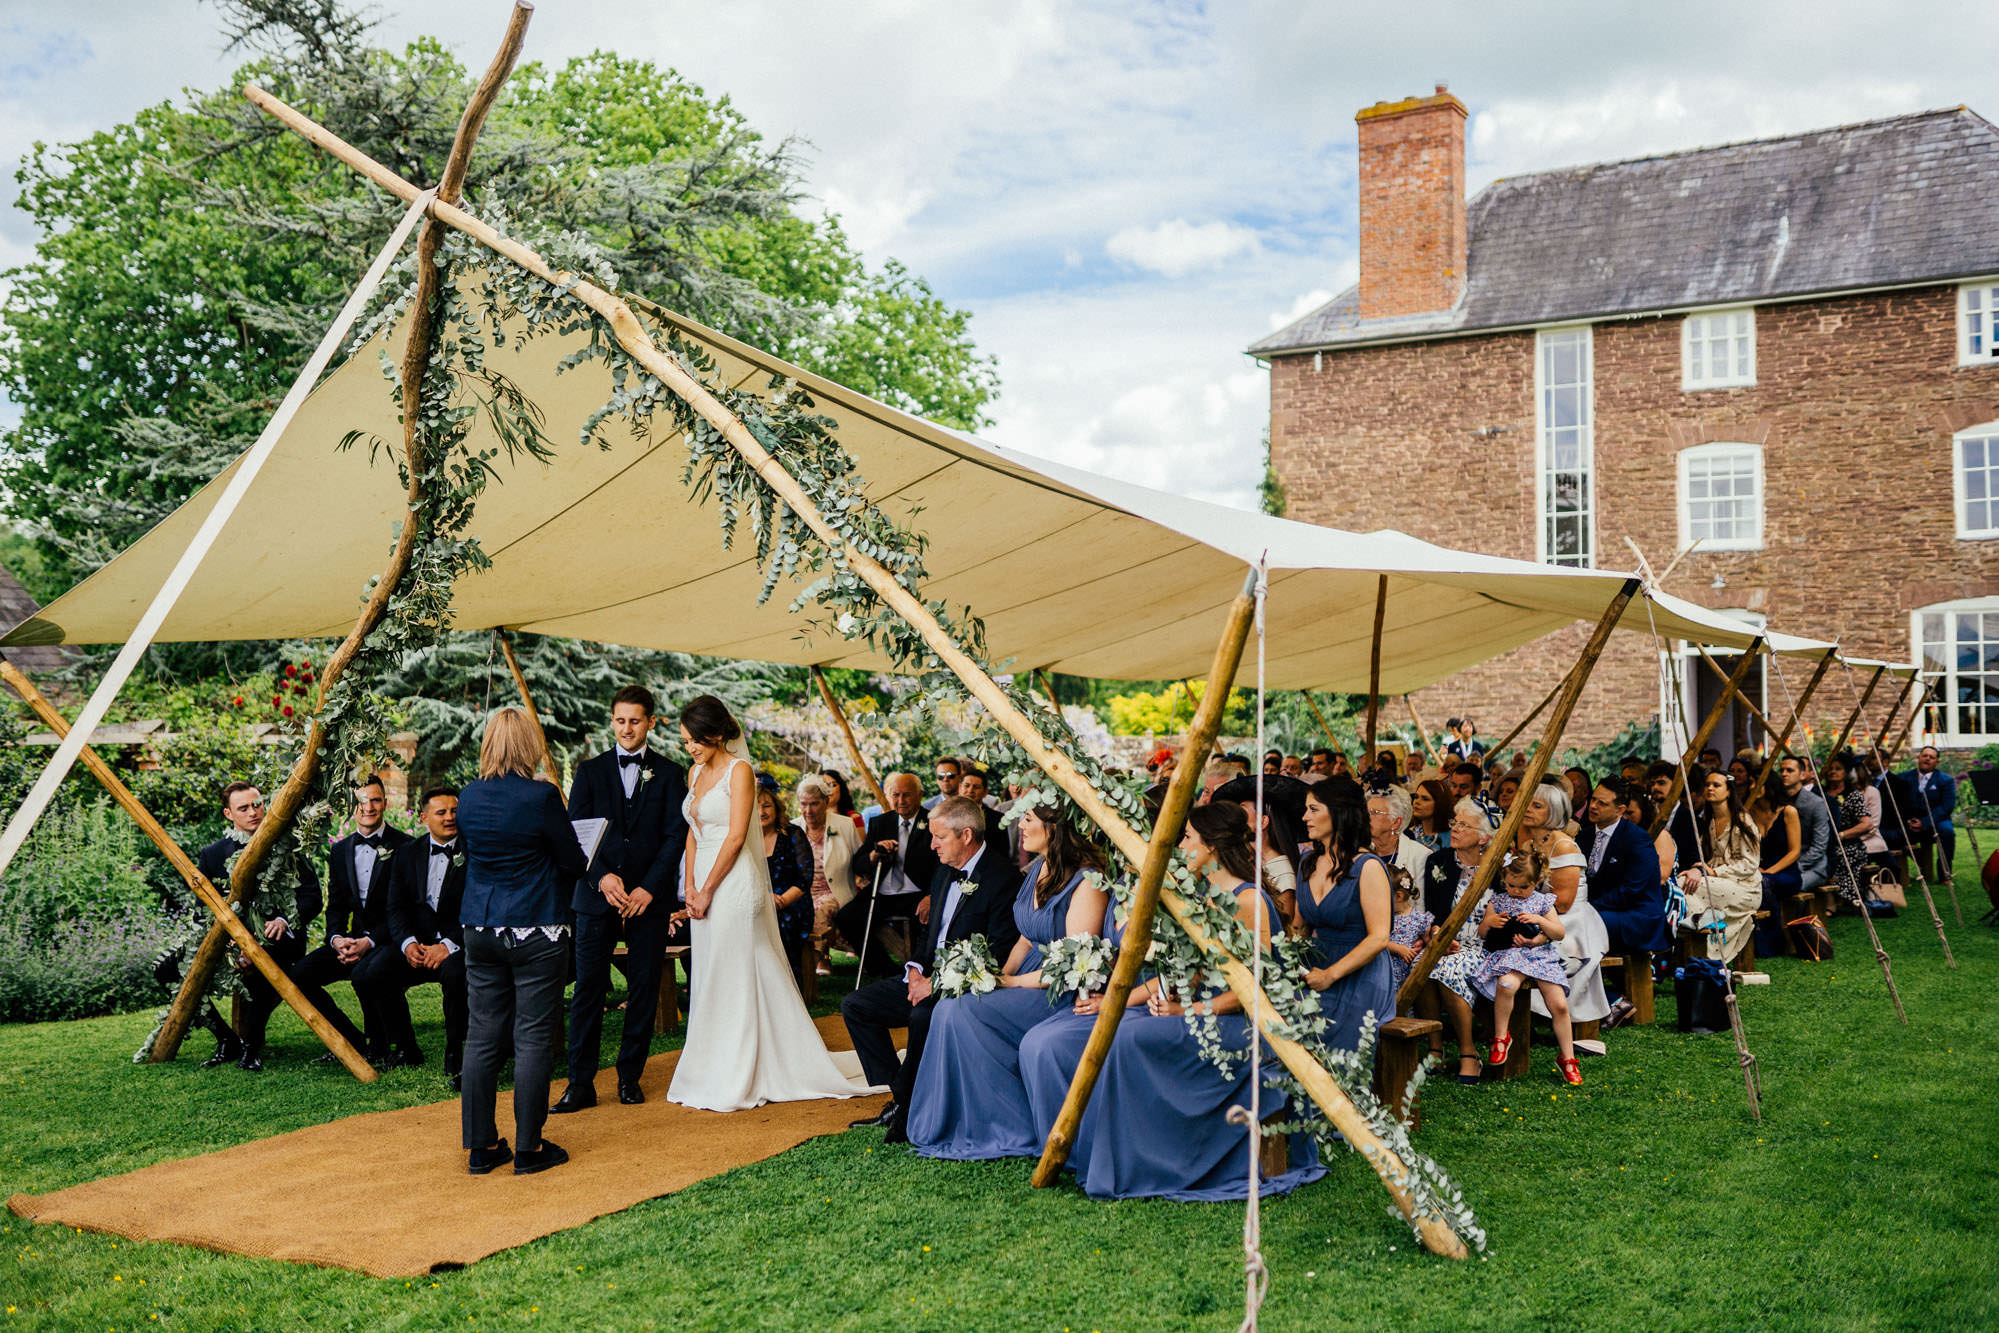 Dewsall Court - Countryside Wedding Venue in Herefordshire